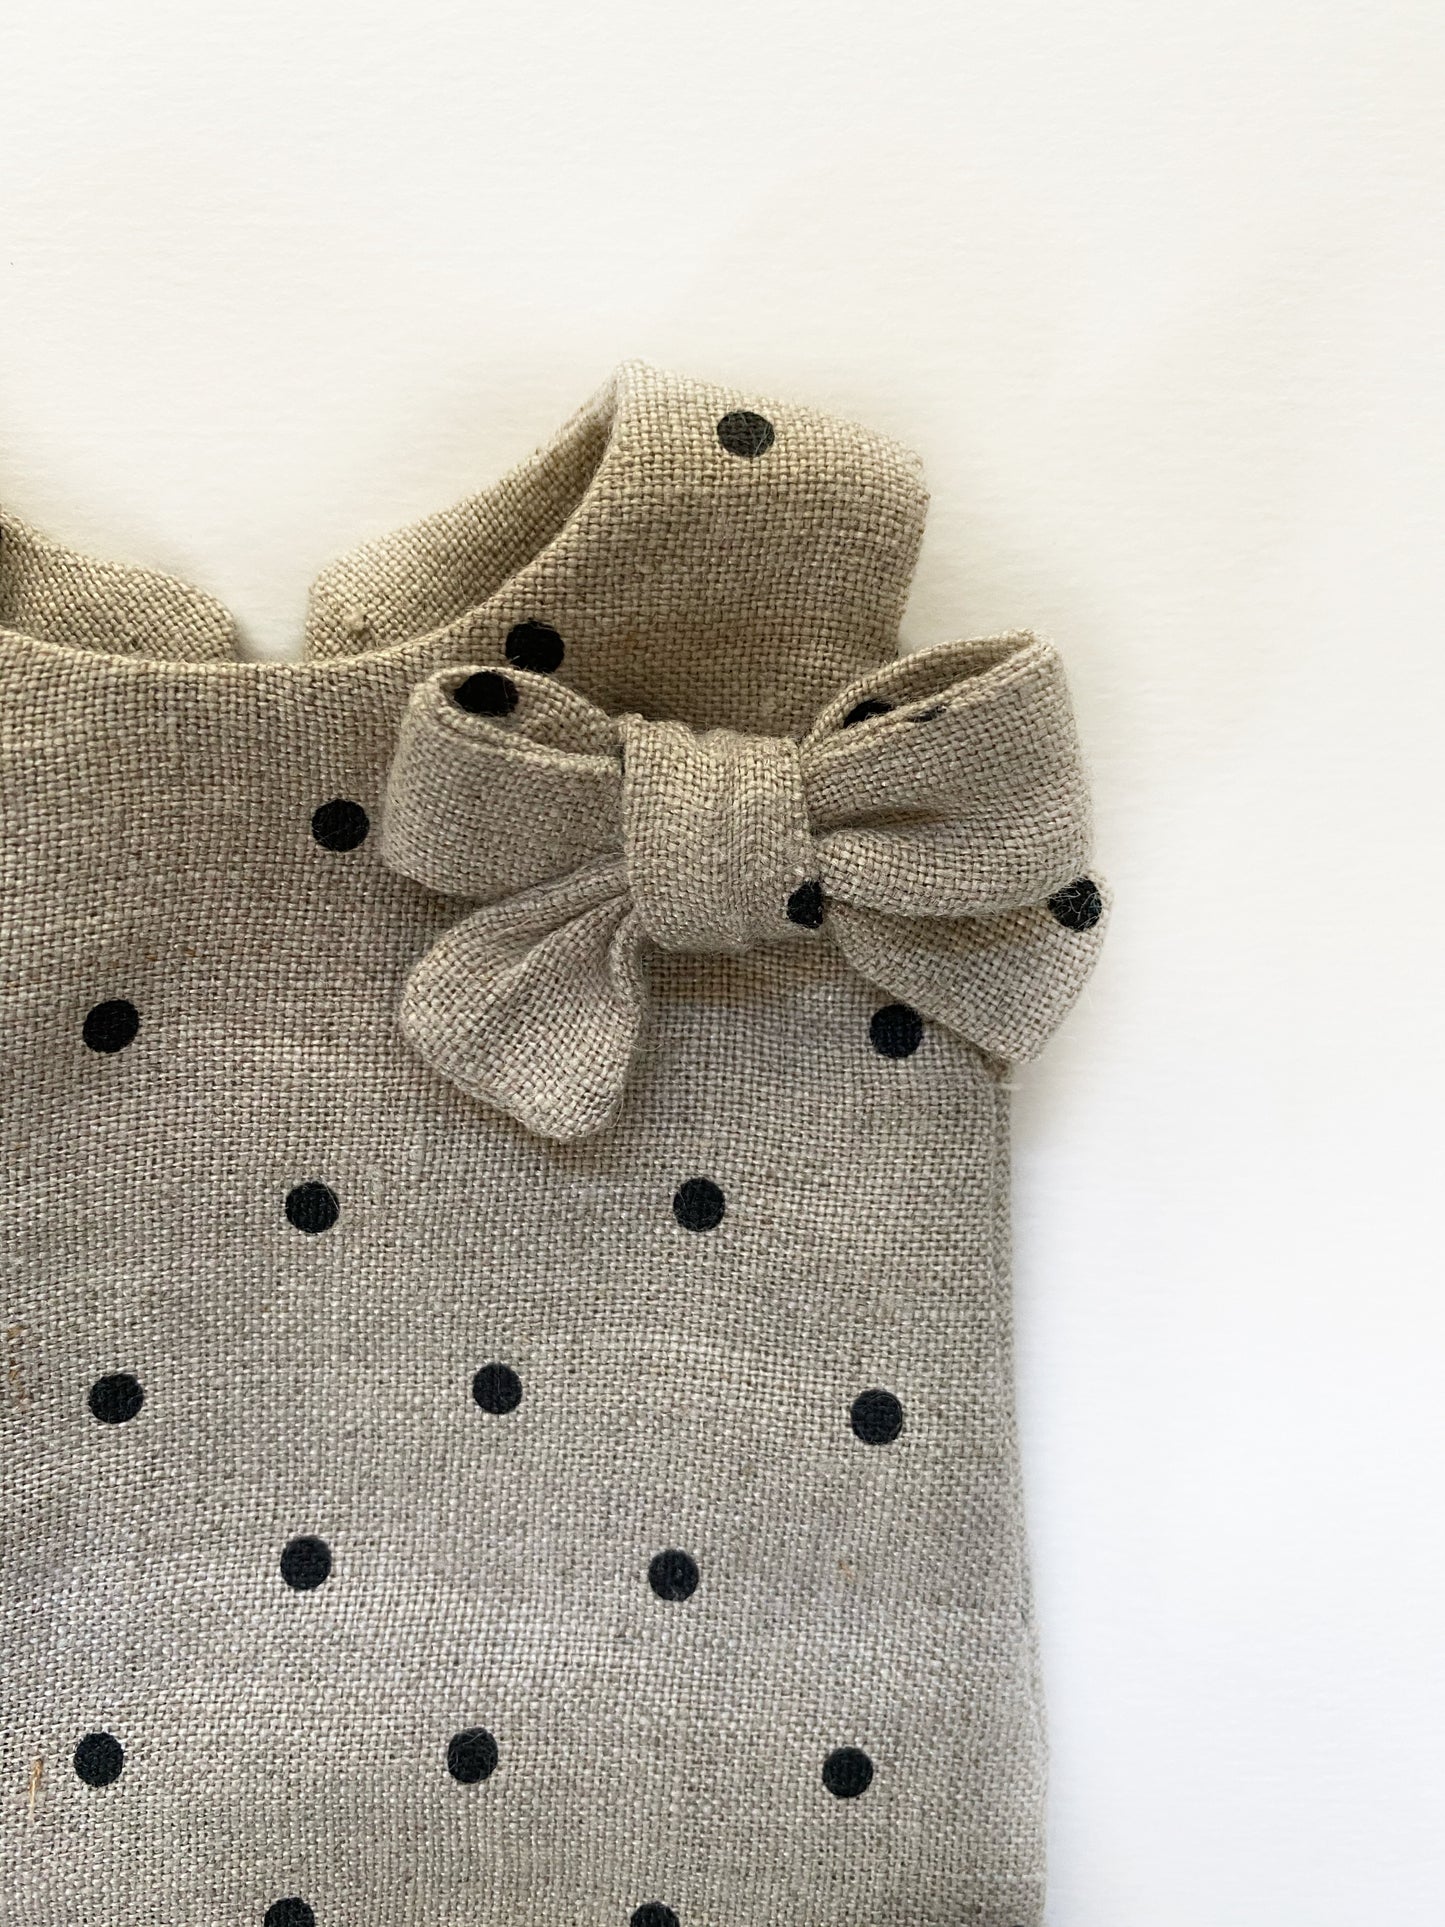 EFI Fawn 55 cm in polka dot linen romper with bow